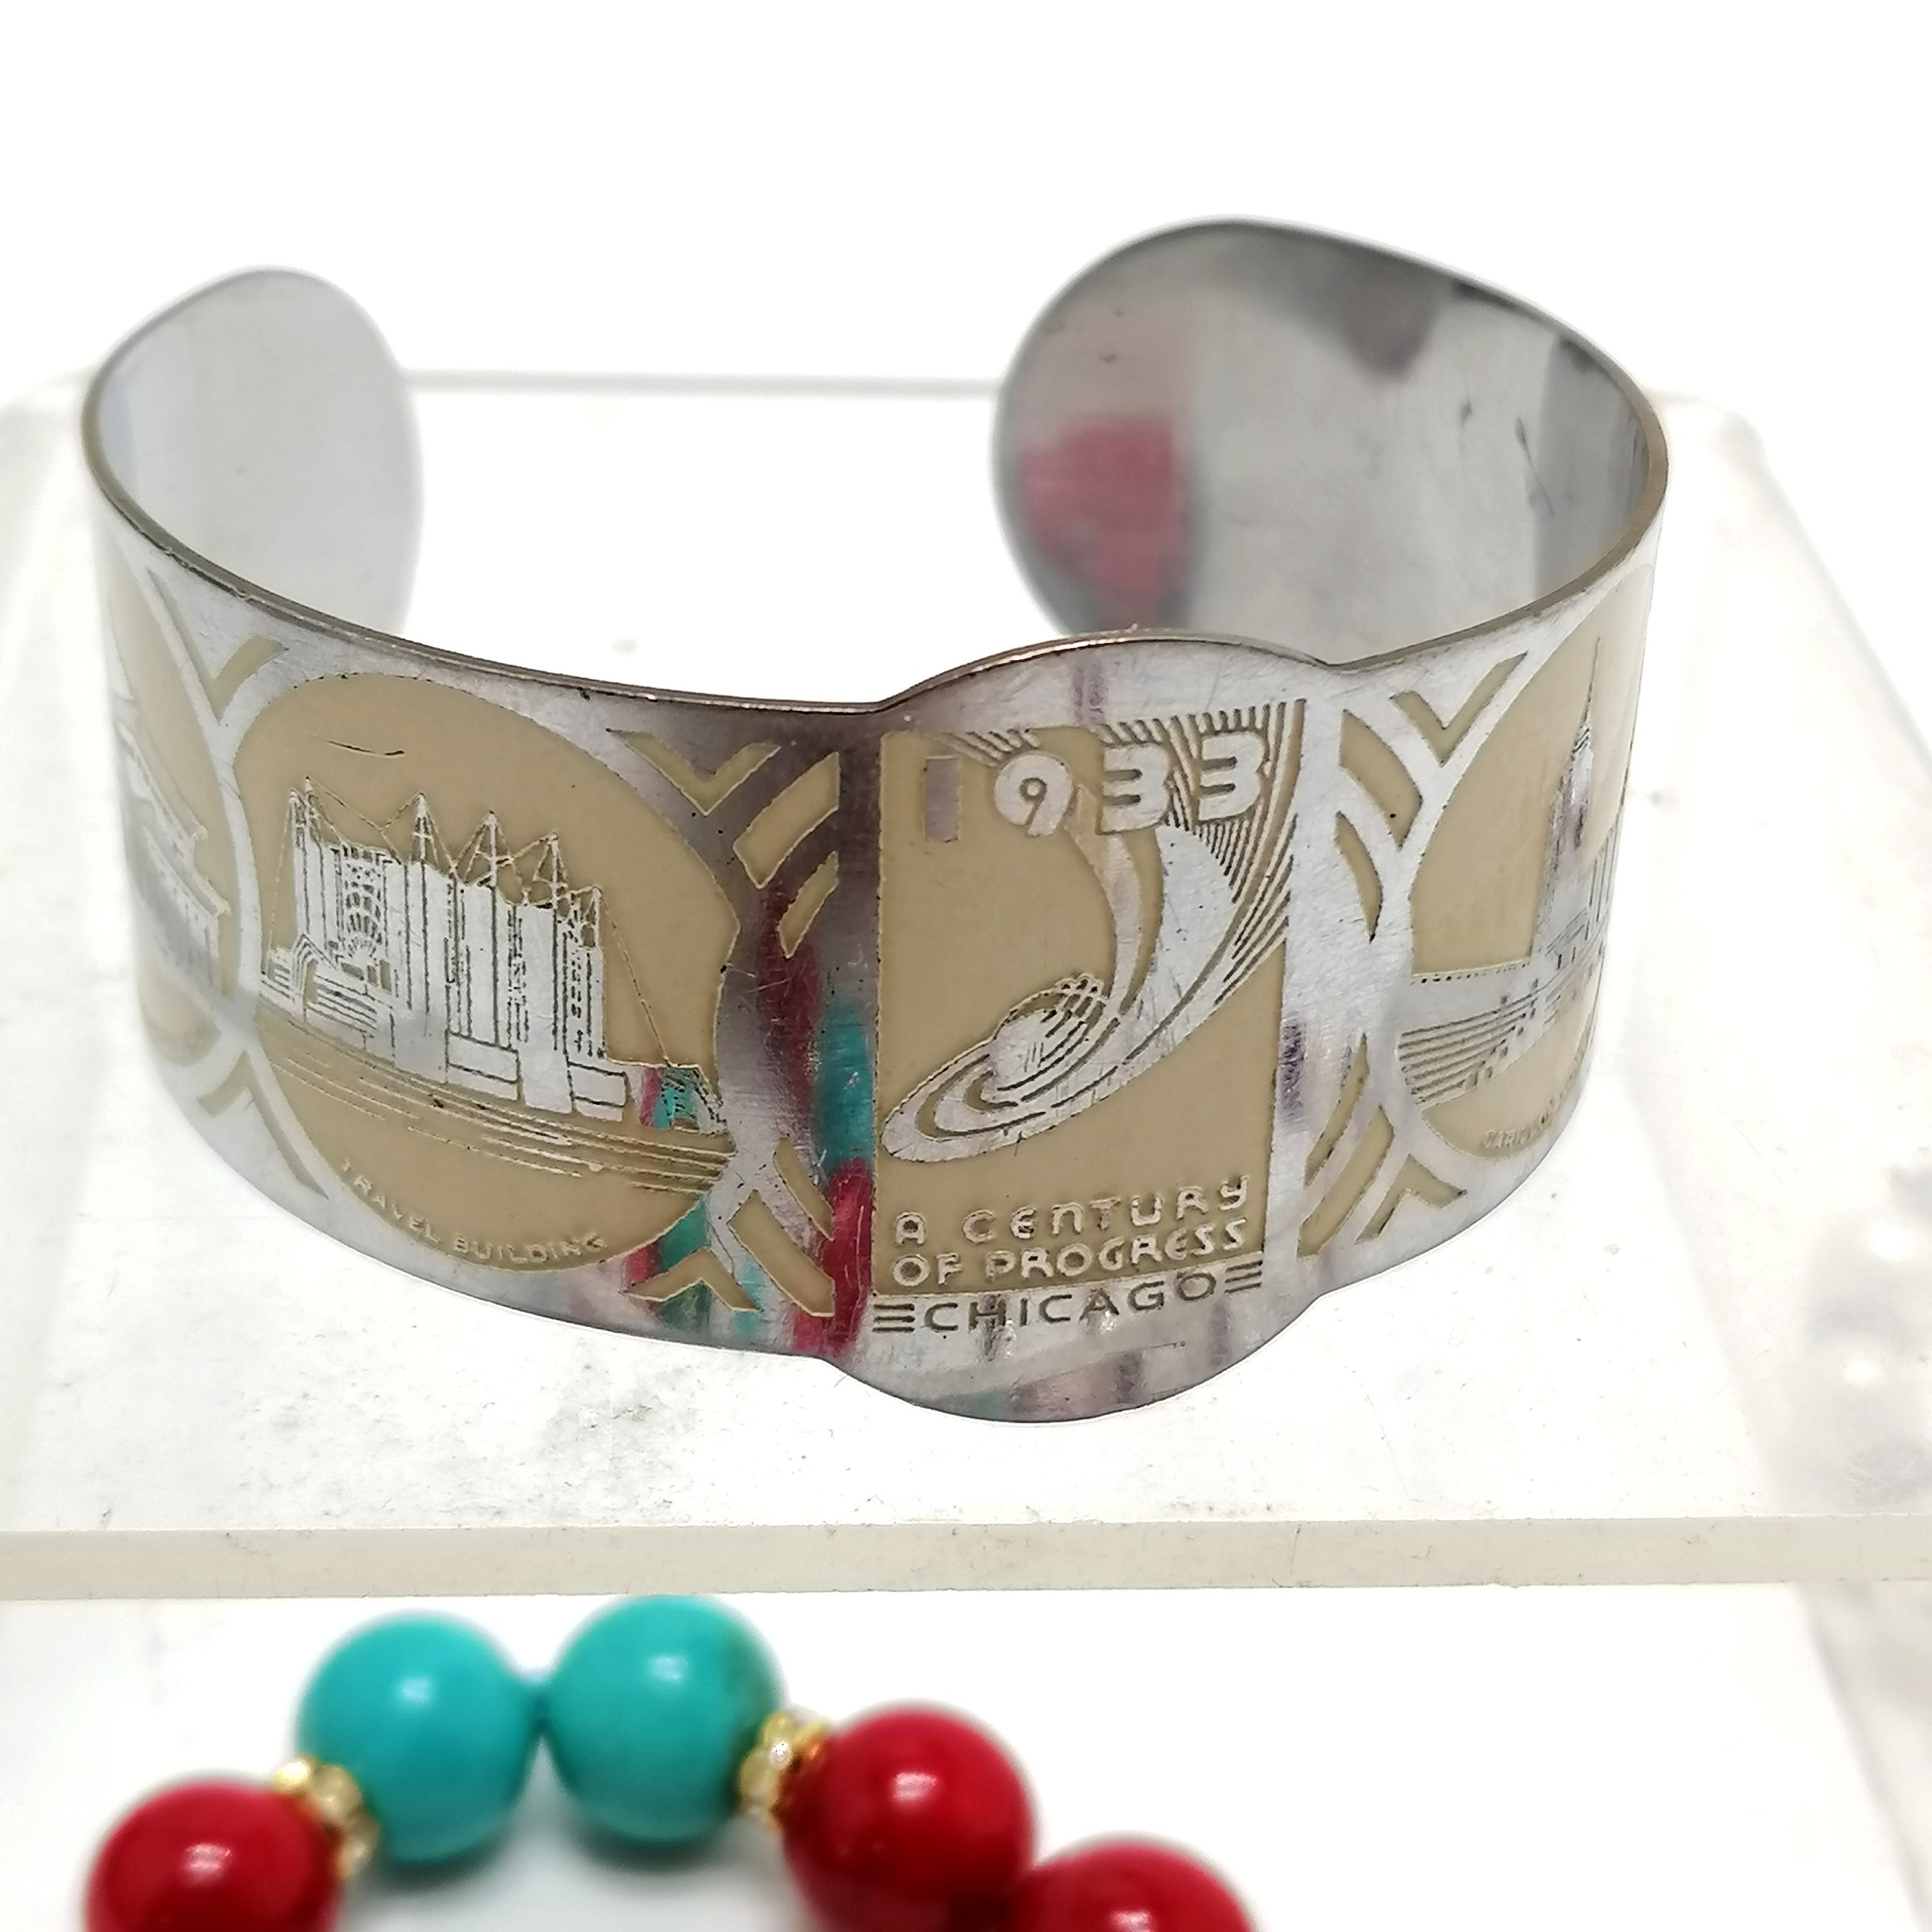 Red stone / pearl 96cm necklace, Deco style bangle & turquoise / red bead necklace - Image 3 of 3